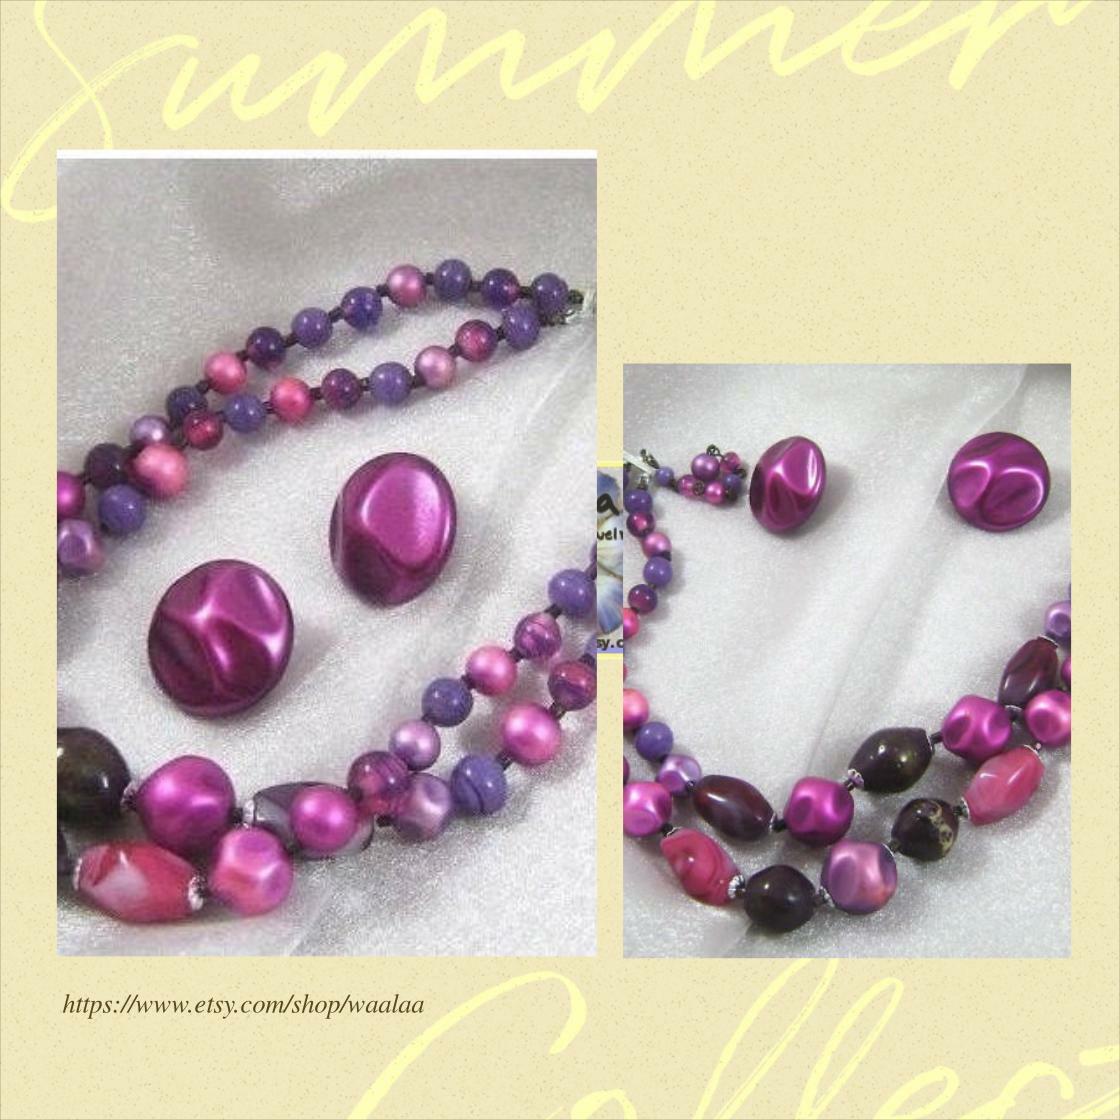 Vintage Necklace. Large Clip Earrings. Vintage Earrings, Vintage Necklace. Purple Bead Necklace Bead Earrings. waalaa. Necklaces for Women. #VintageNecklace #ClipOnEarrings 
$42.99
➤ etsy.com/listing/617523…